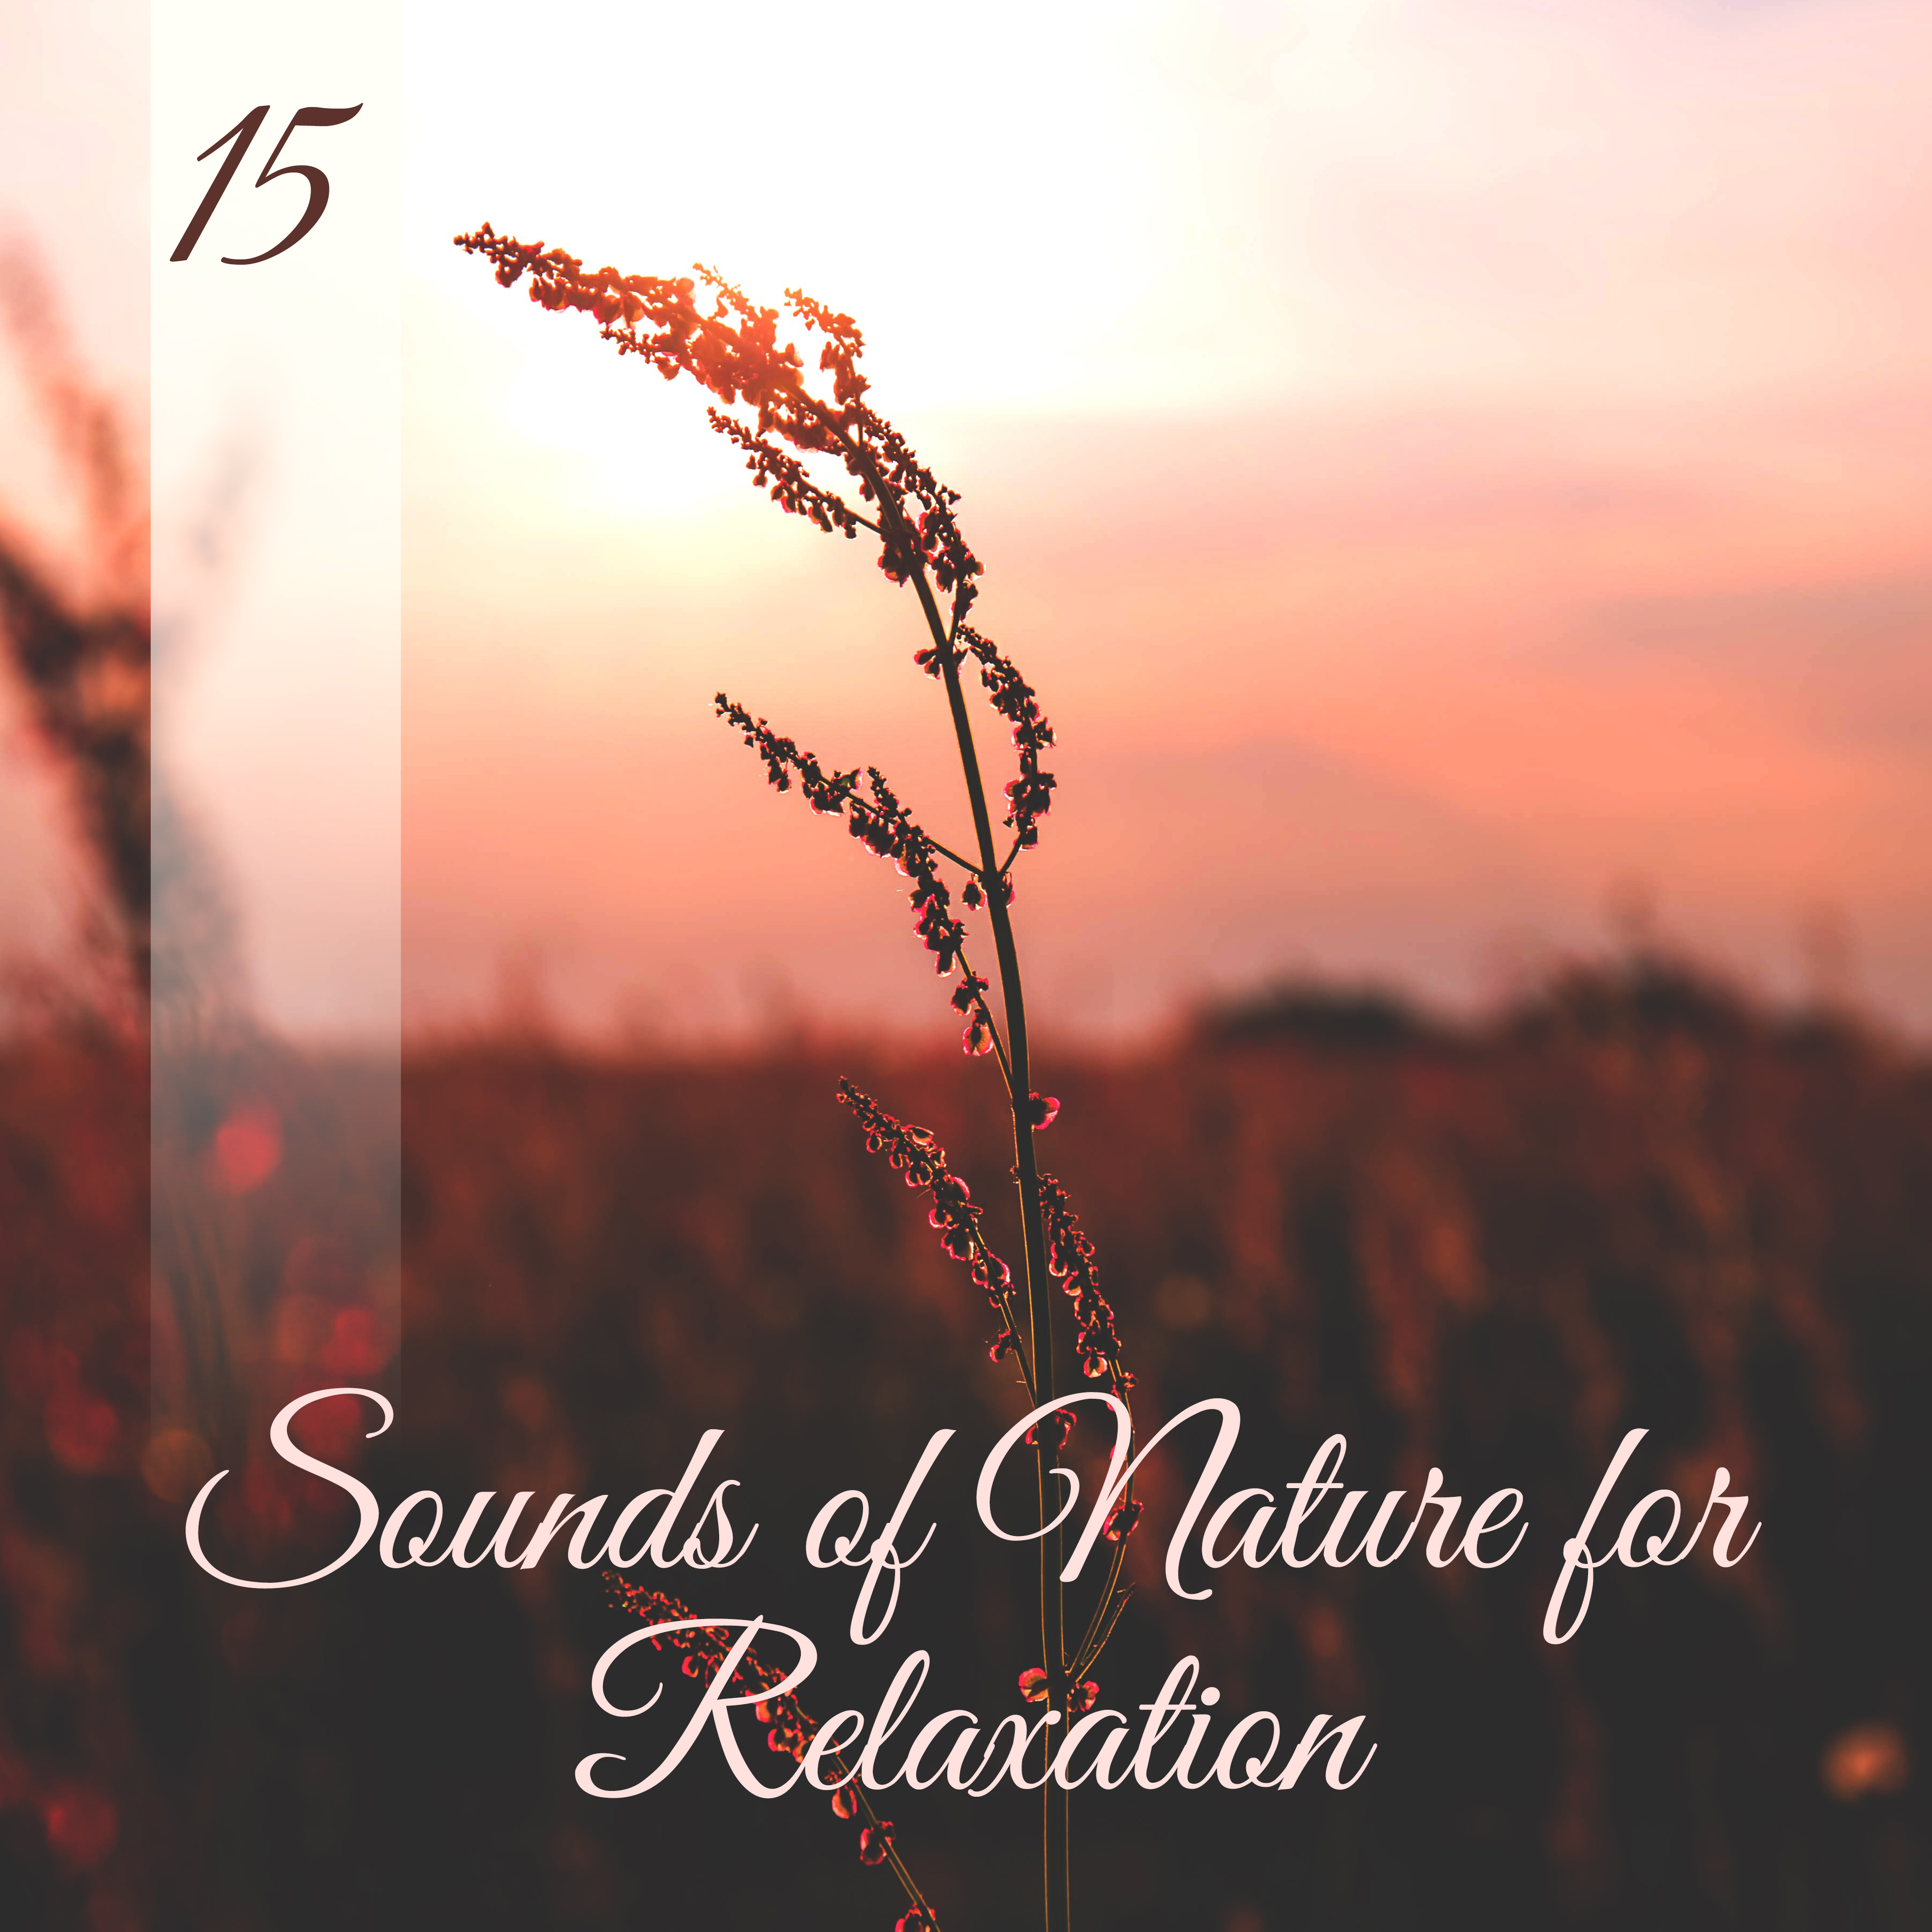 15 Sounds of Nature for Relaxation